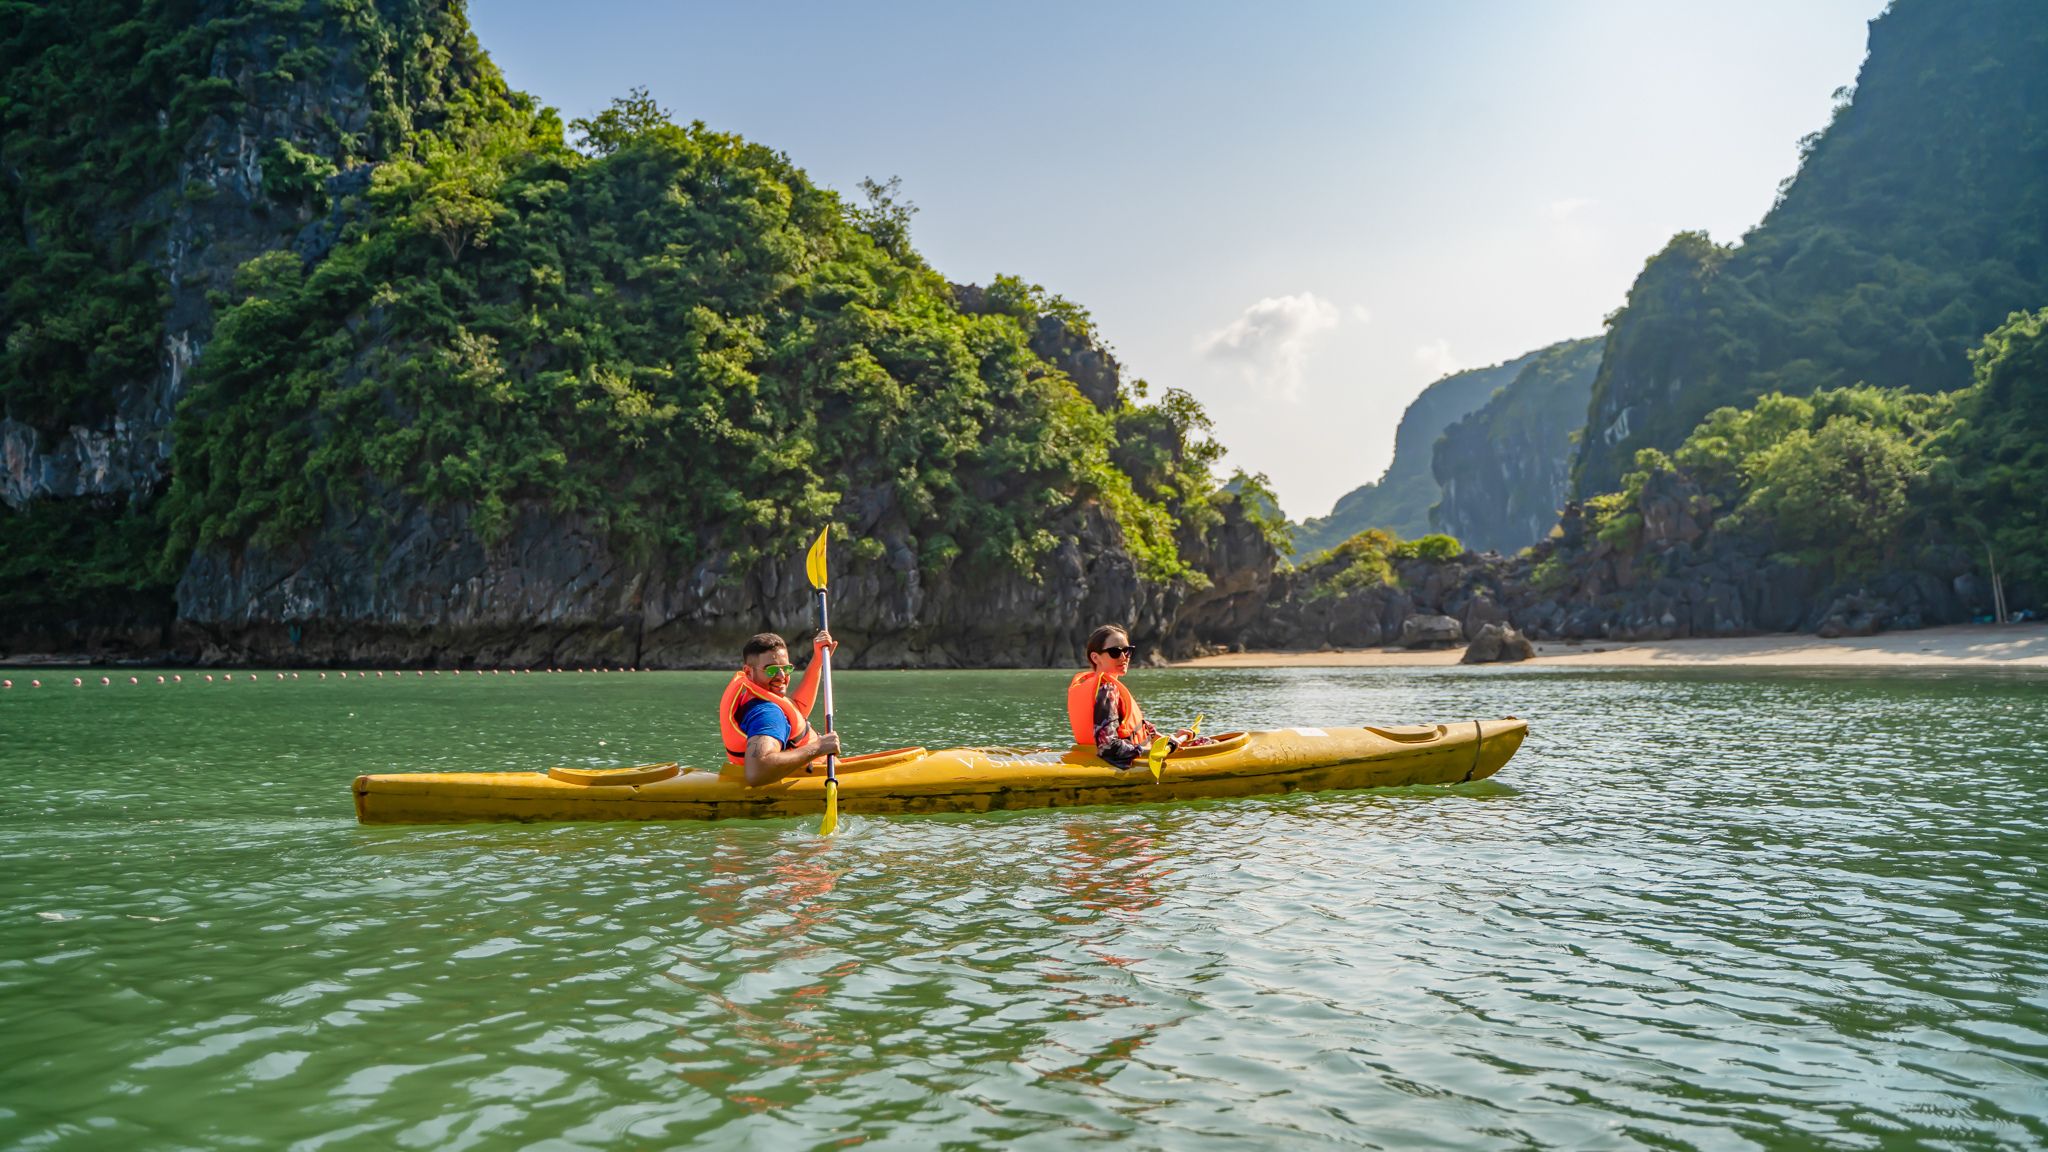 Day 3 Enjoy The Spectacular View Of Halong Bay While Kayaking